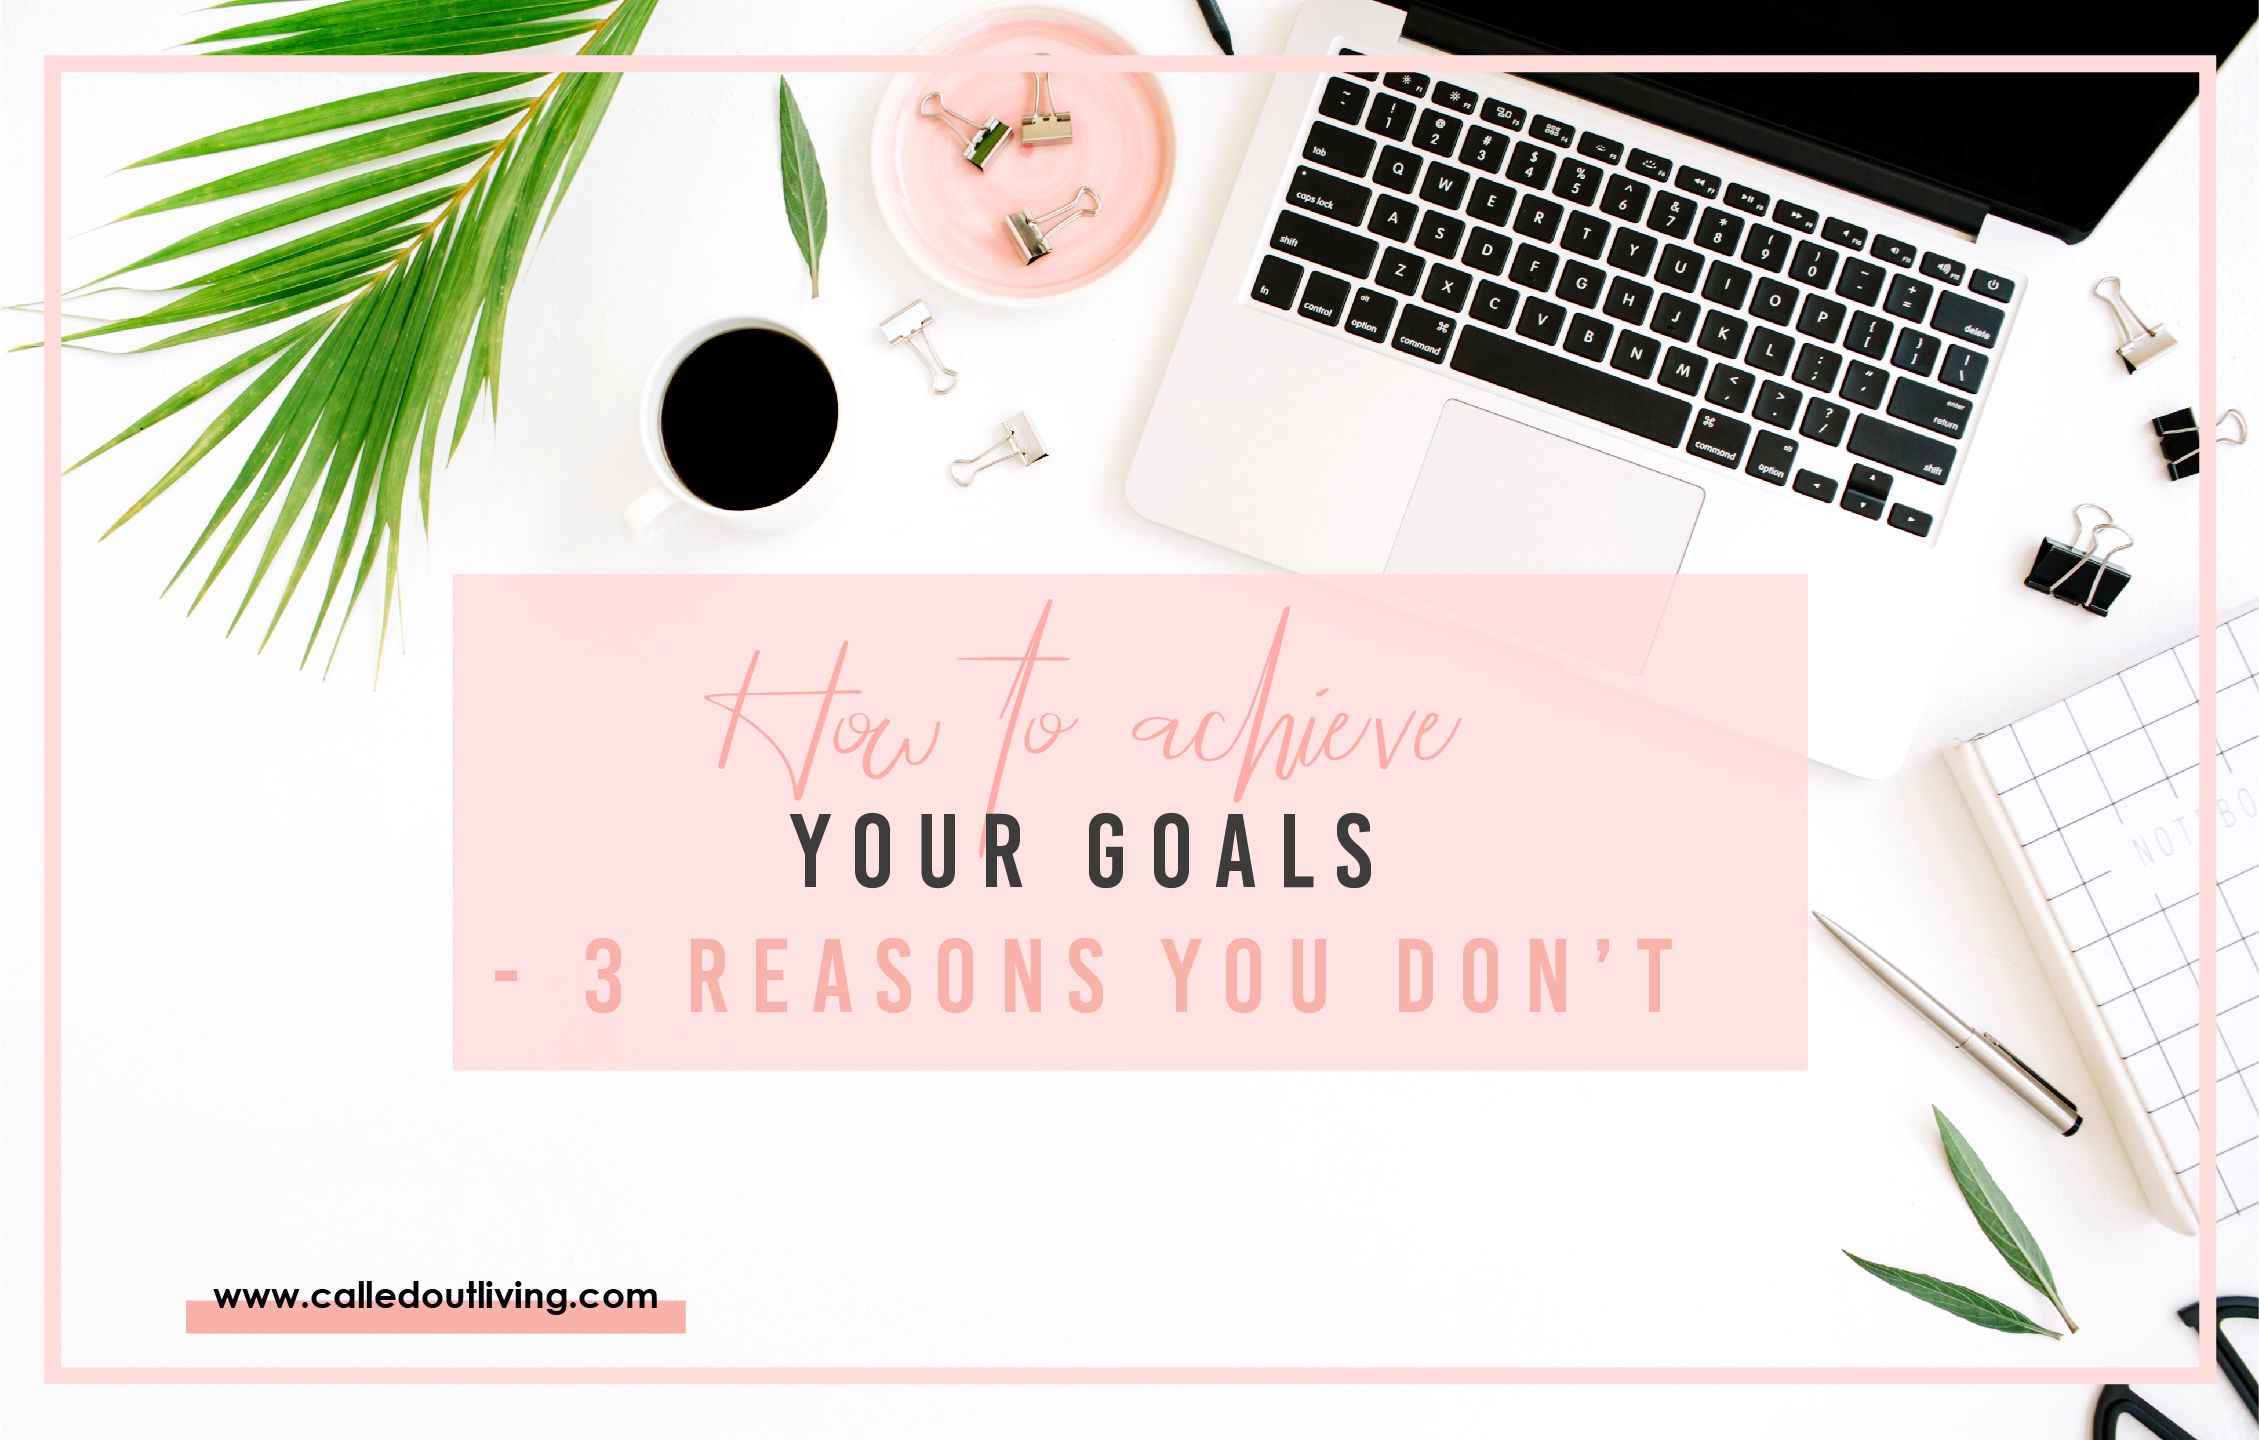 How to achieve your goals - 3 reasons you don't and what to do instead - goal setting tips for female entrepreneurs - 2020 goal planning